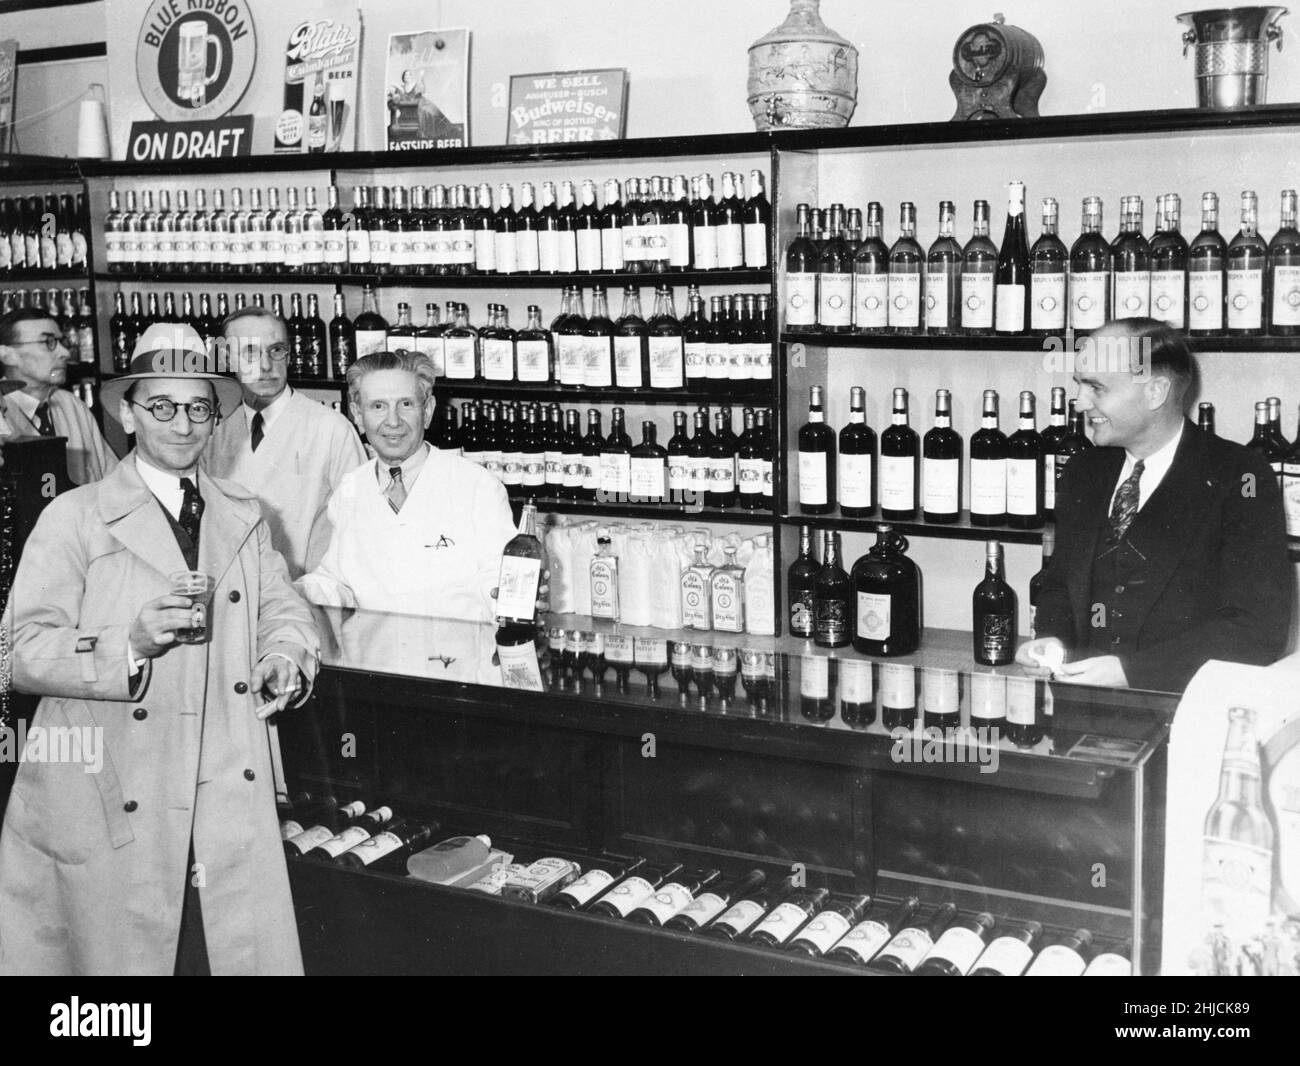 A well-stocked Los Angeles liquor store awaits repeal, 1933. Prohibition ended with the ratification of the Twenty-first Amendment, which repealed the Eighteenth Amendment on December 5, 1933. Prohibition lasted from 1920 to 1933. Stock Photo